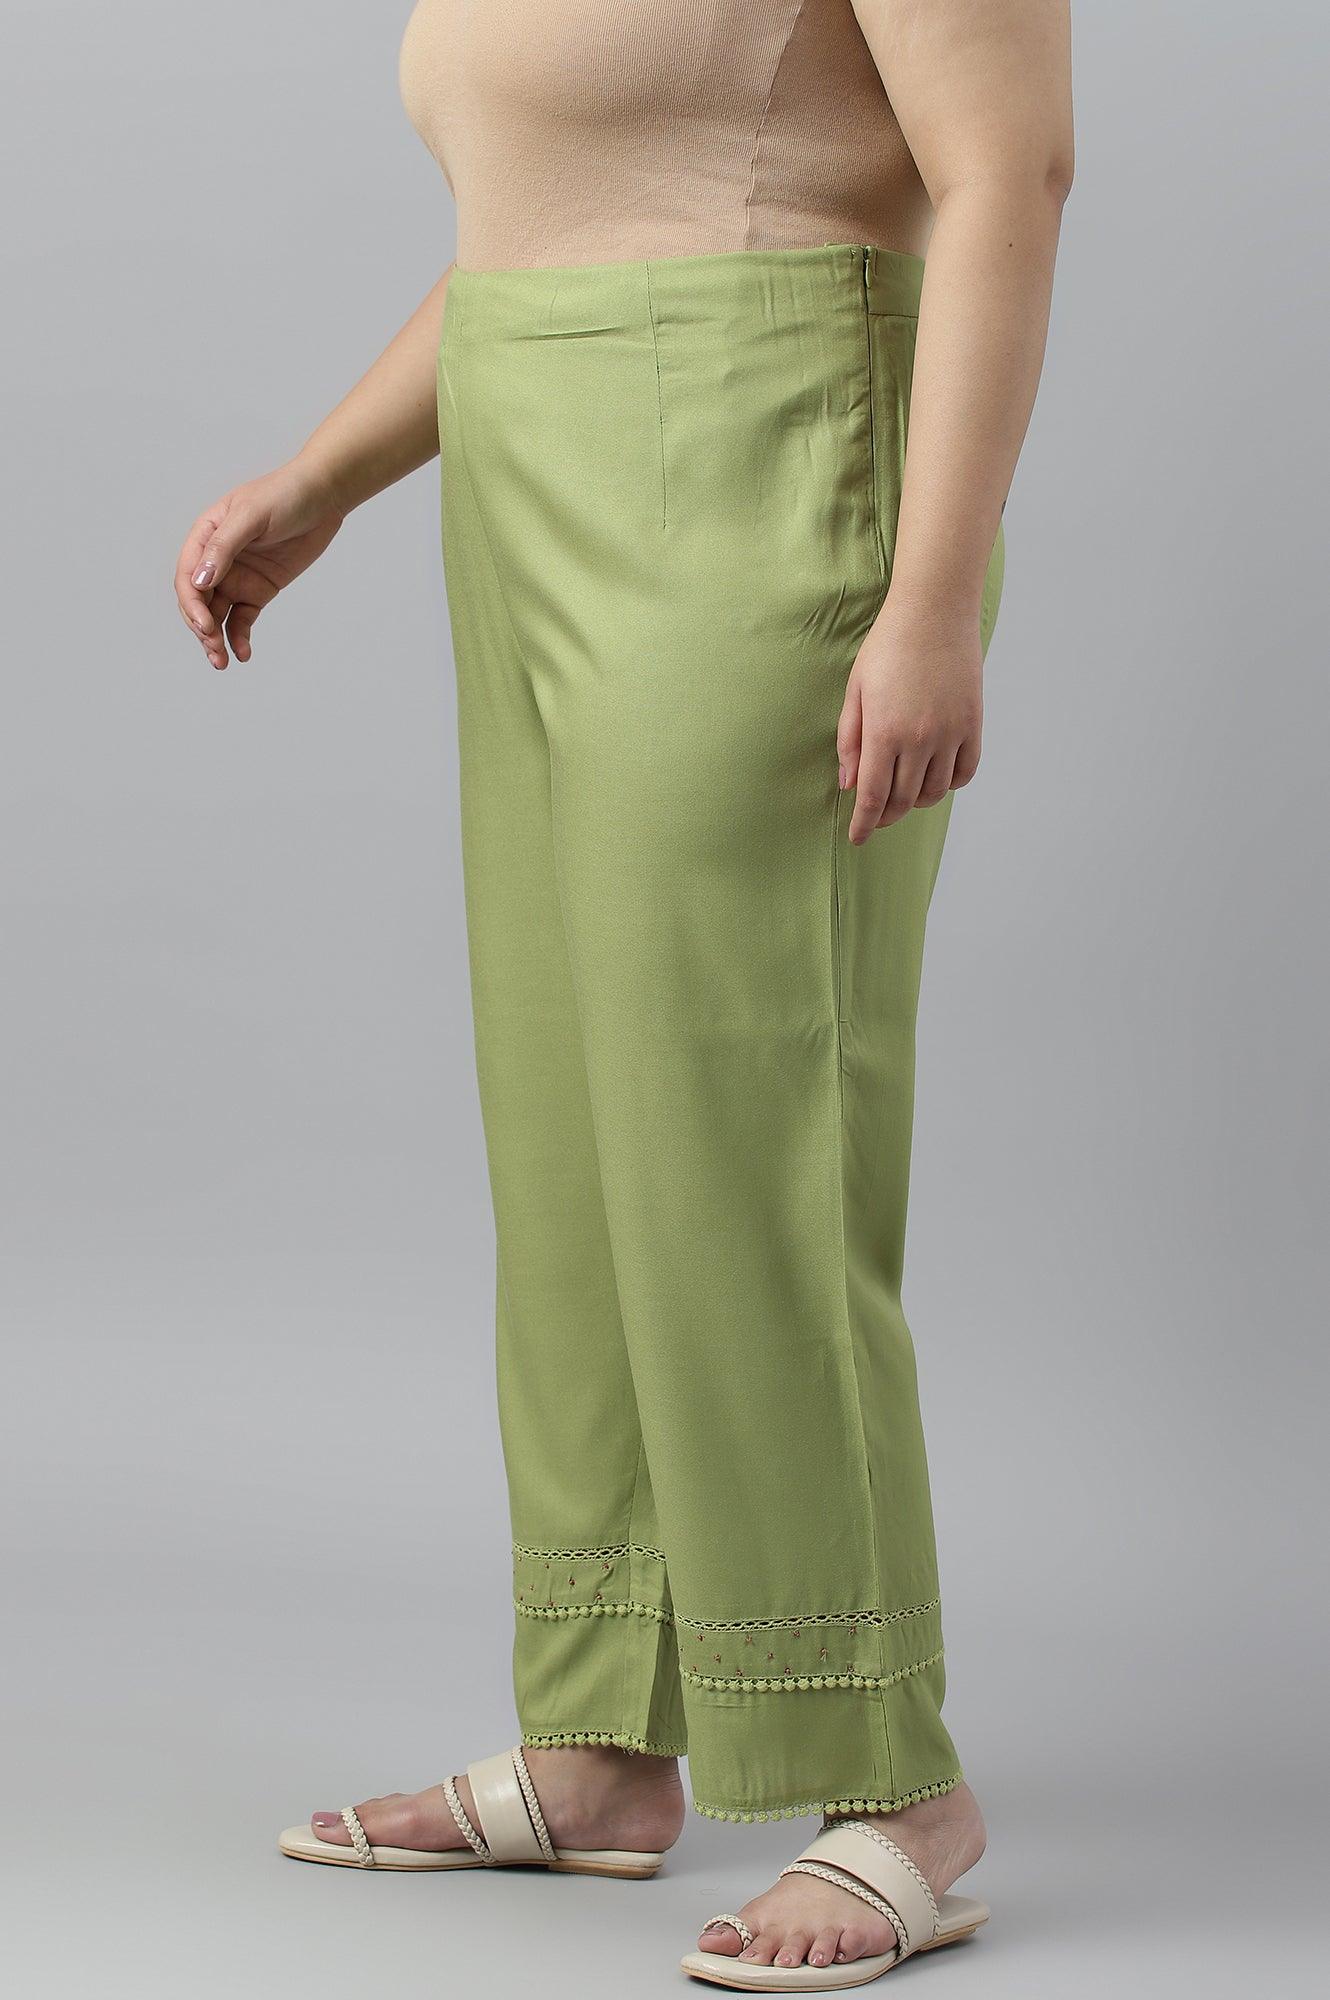 Green Straight Pants With Lace Details - wforwoman